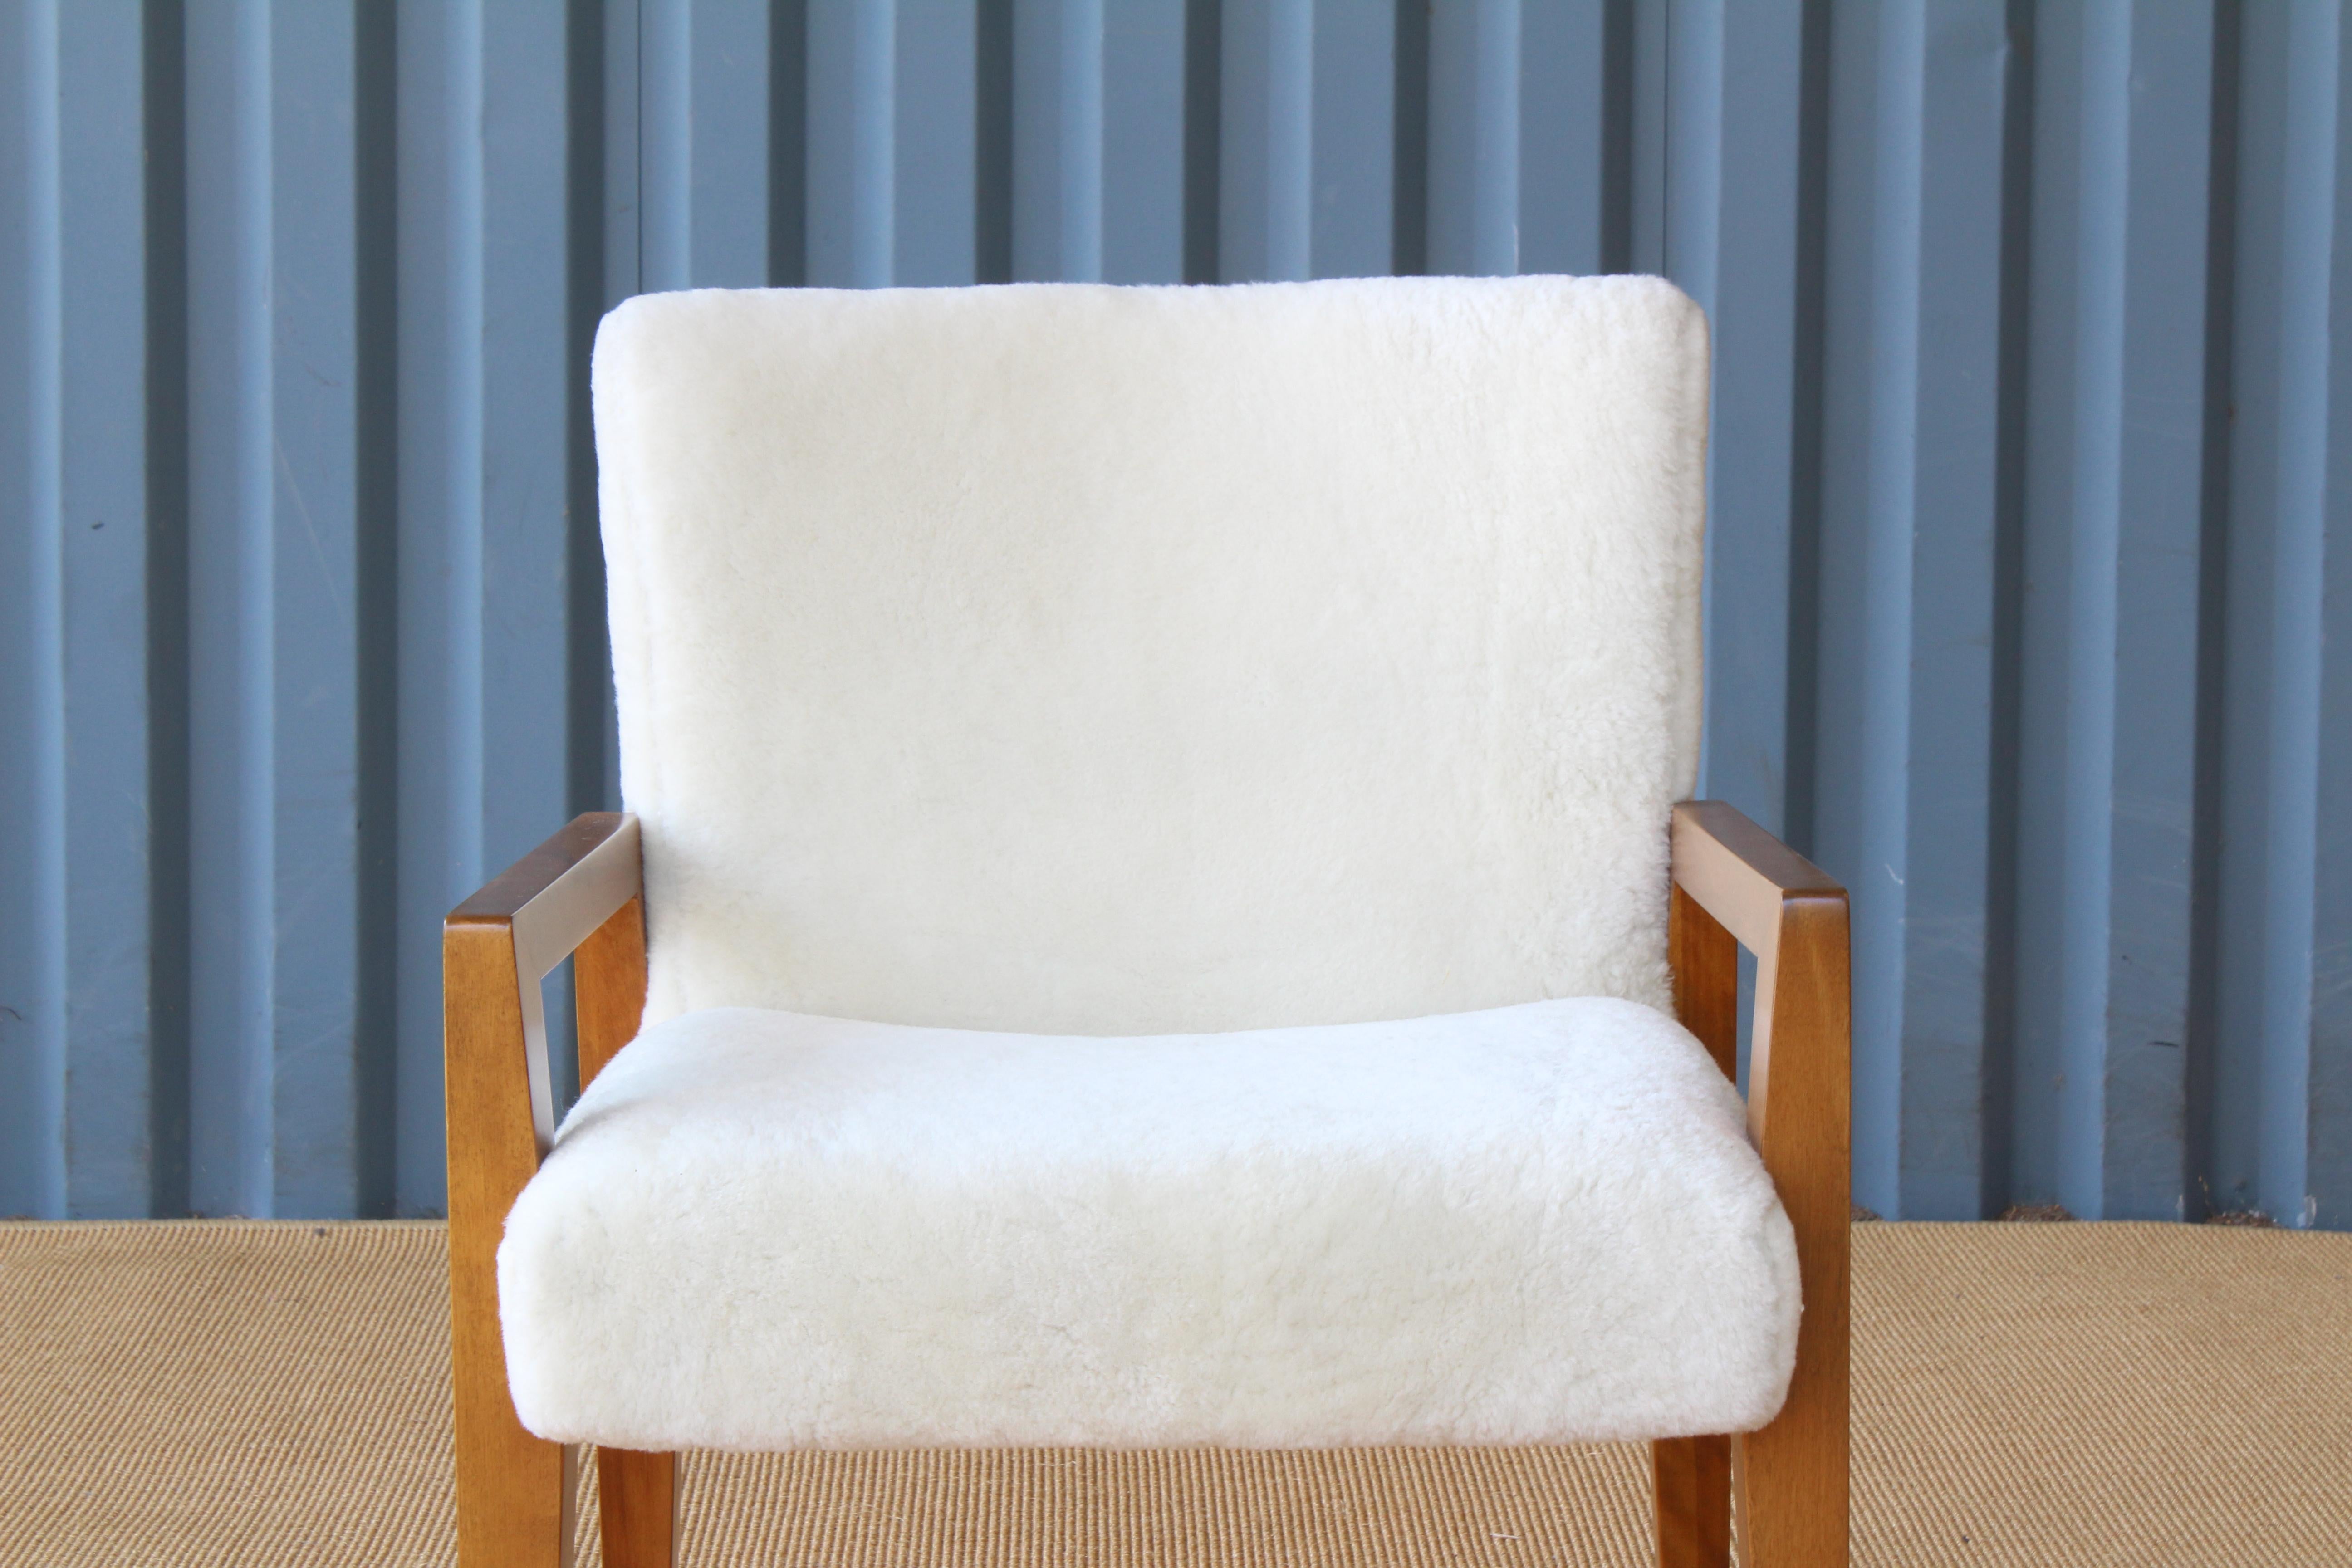 1950s midcentury armchair with a birchwood frame and new shearling upholstery.